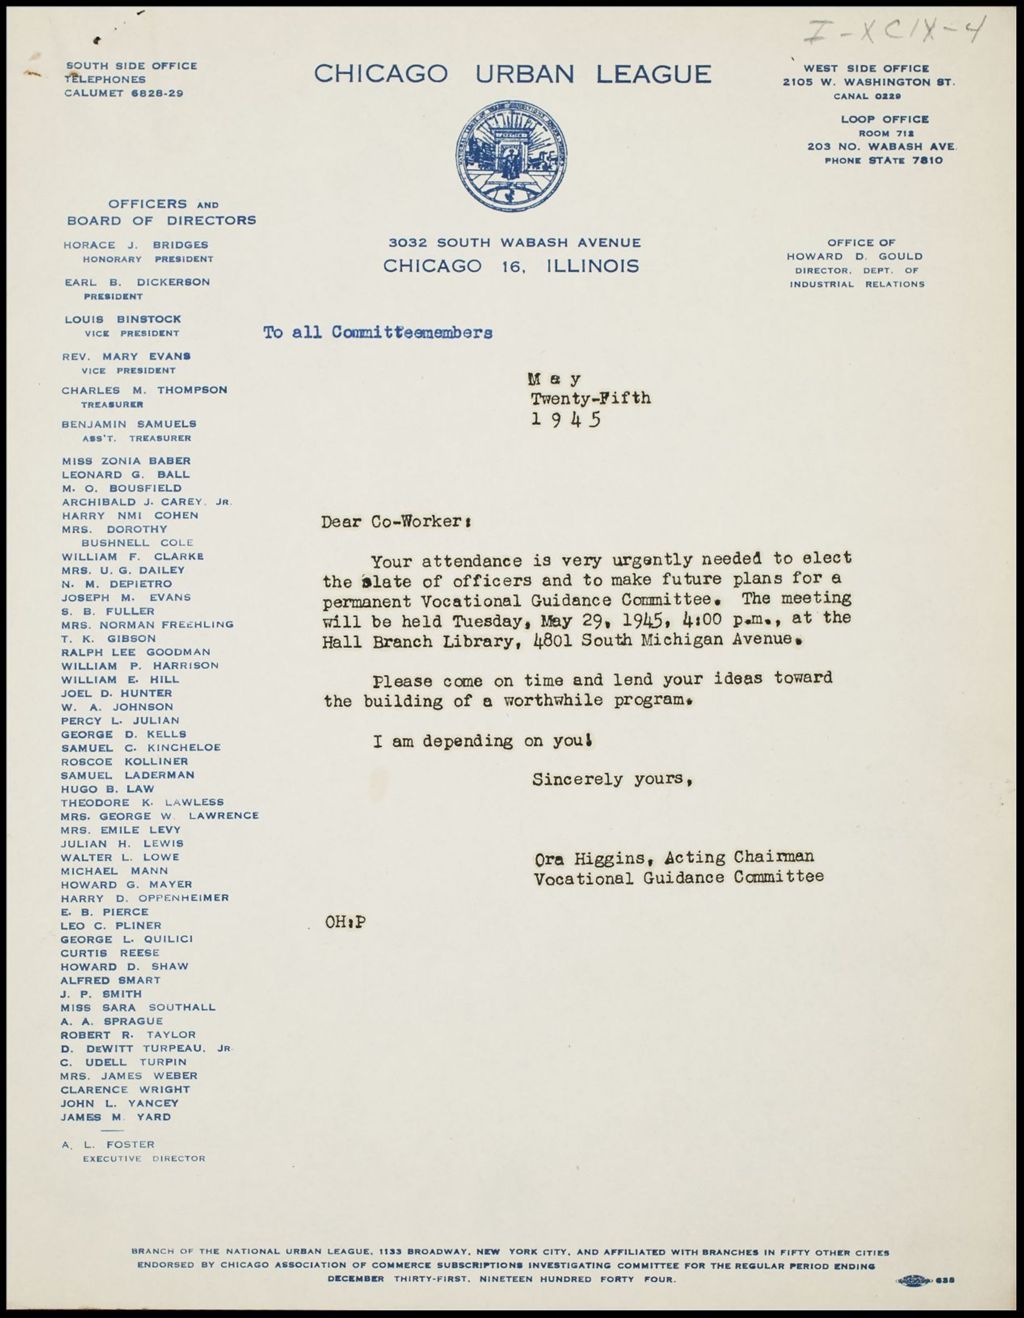 Miniature of Vocational Guidance Committee, 1945 (Folder I-2770)